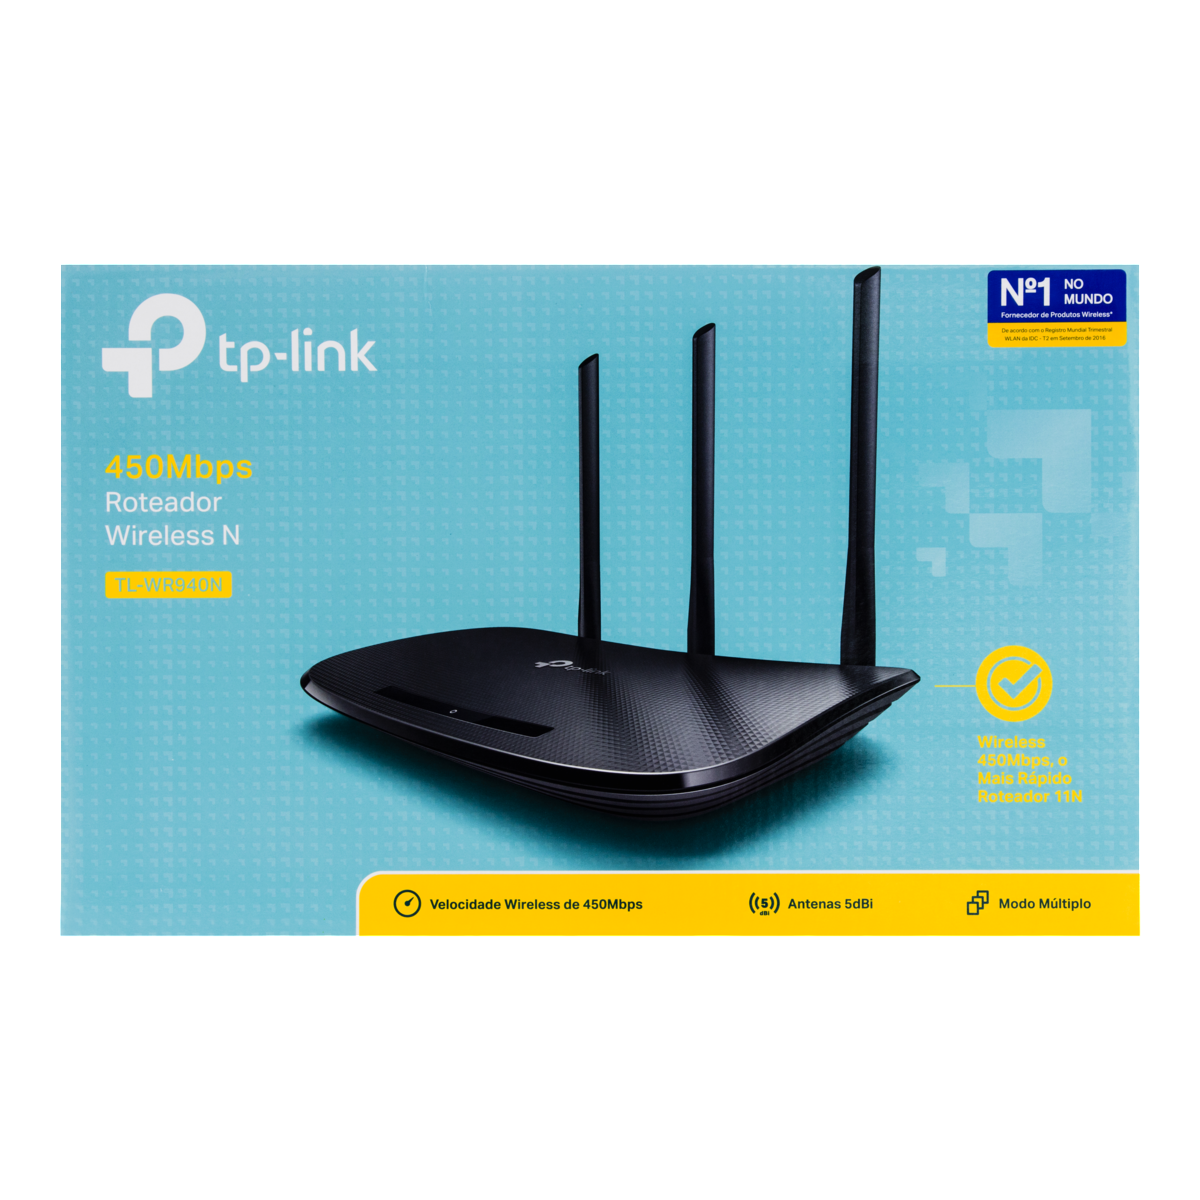 7898544550869 - ROTEADOR WIRELESS N 450 MBPS TL-WR940N TP-LINK